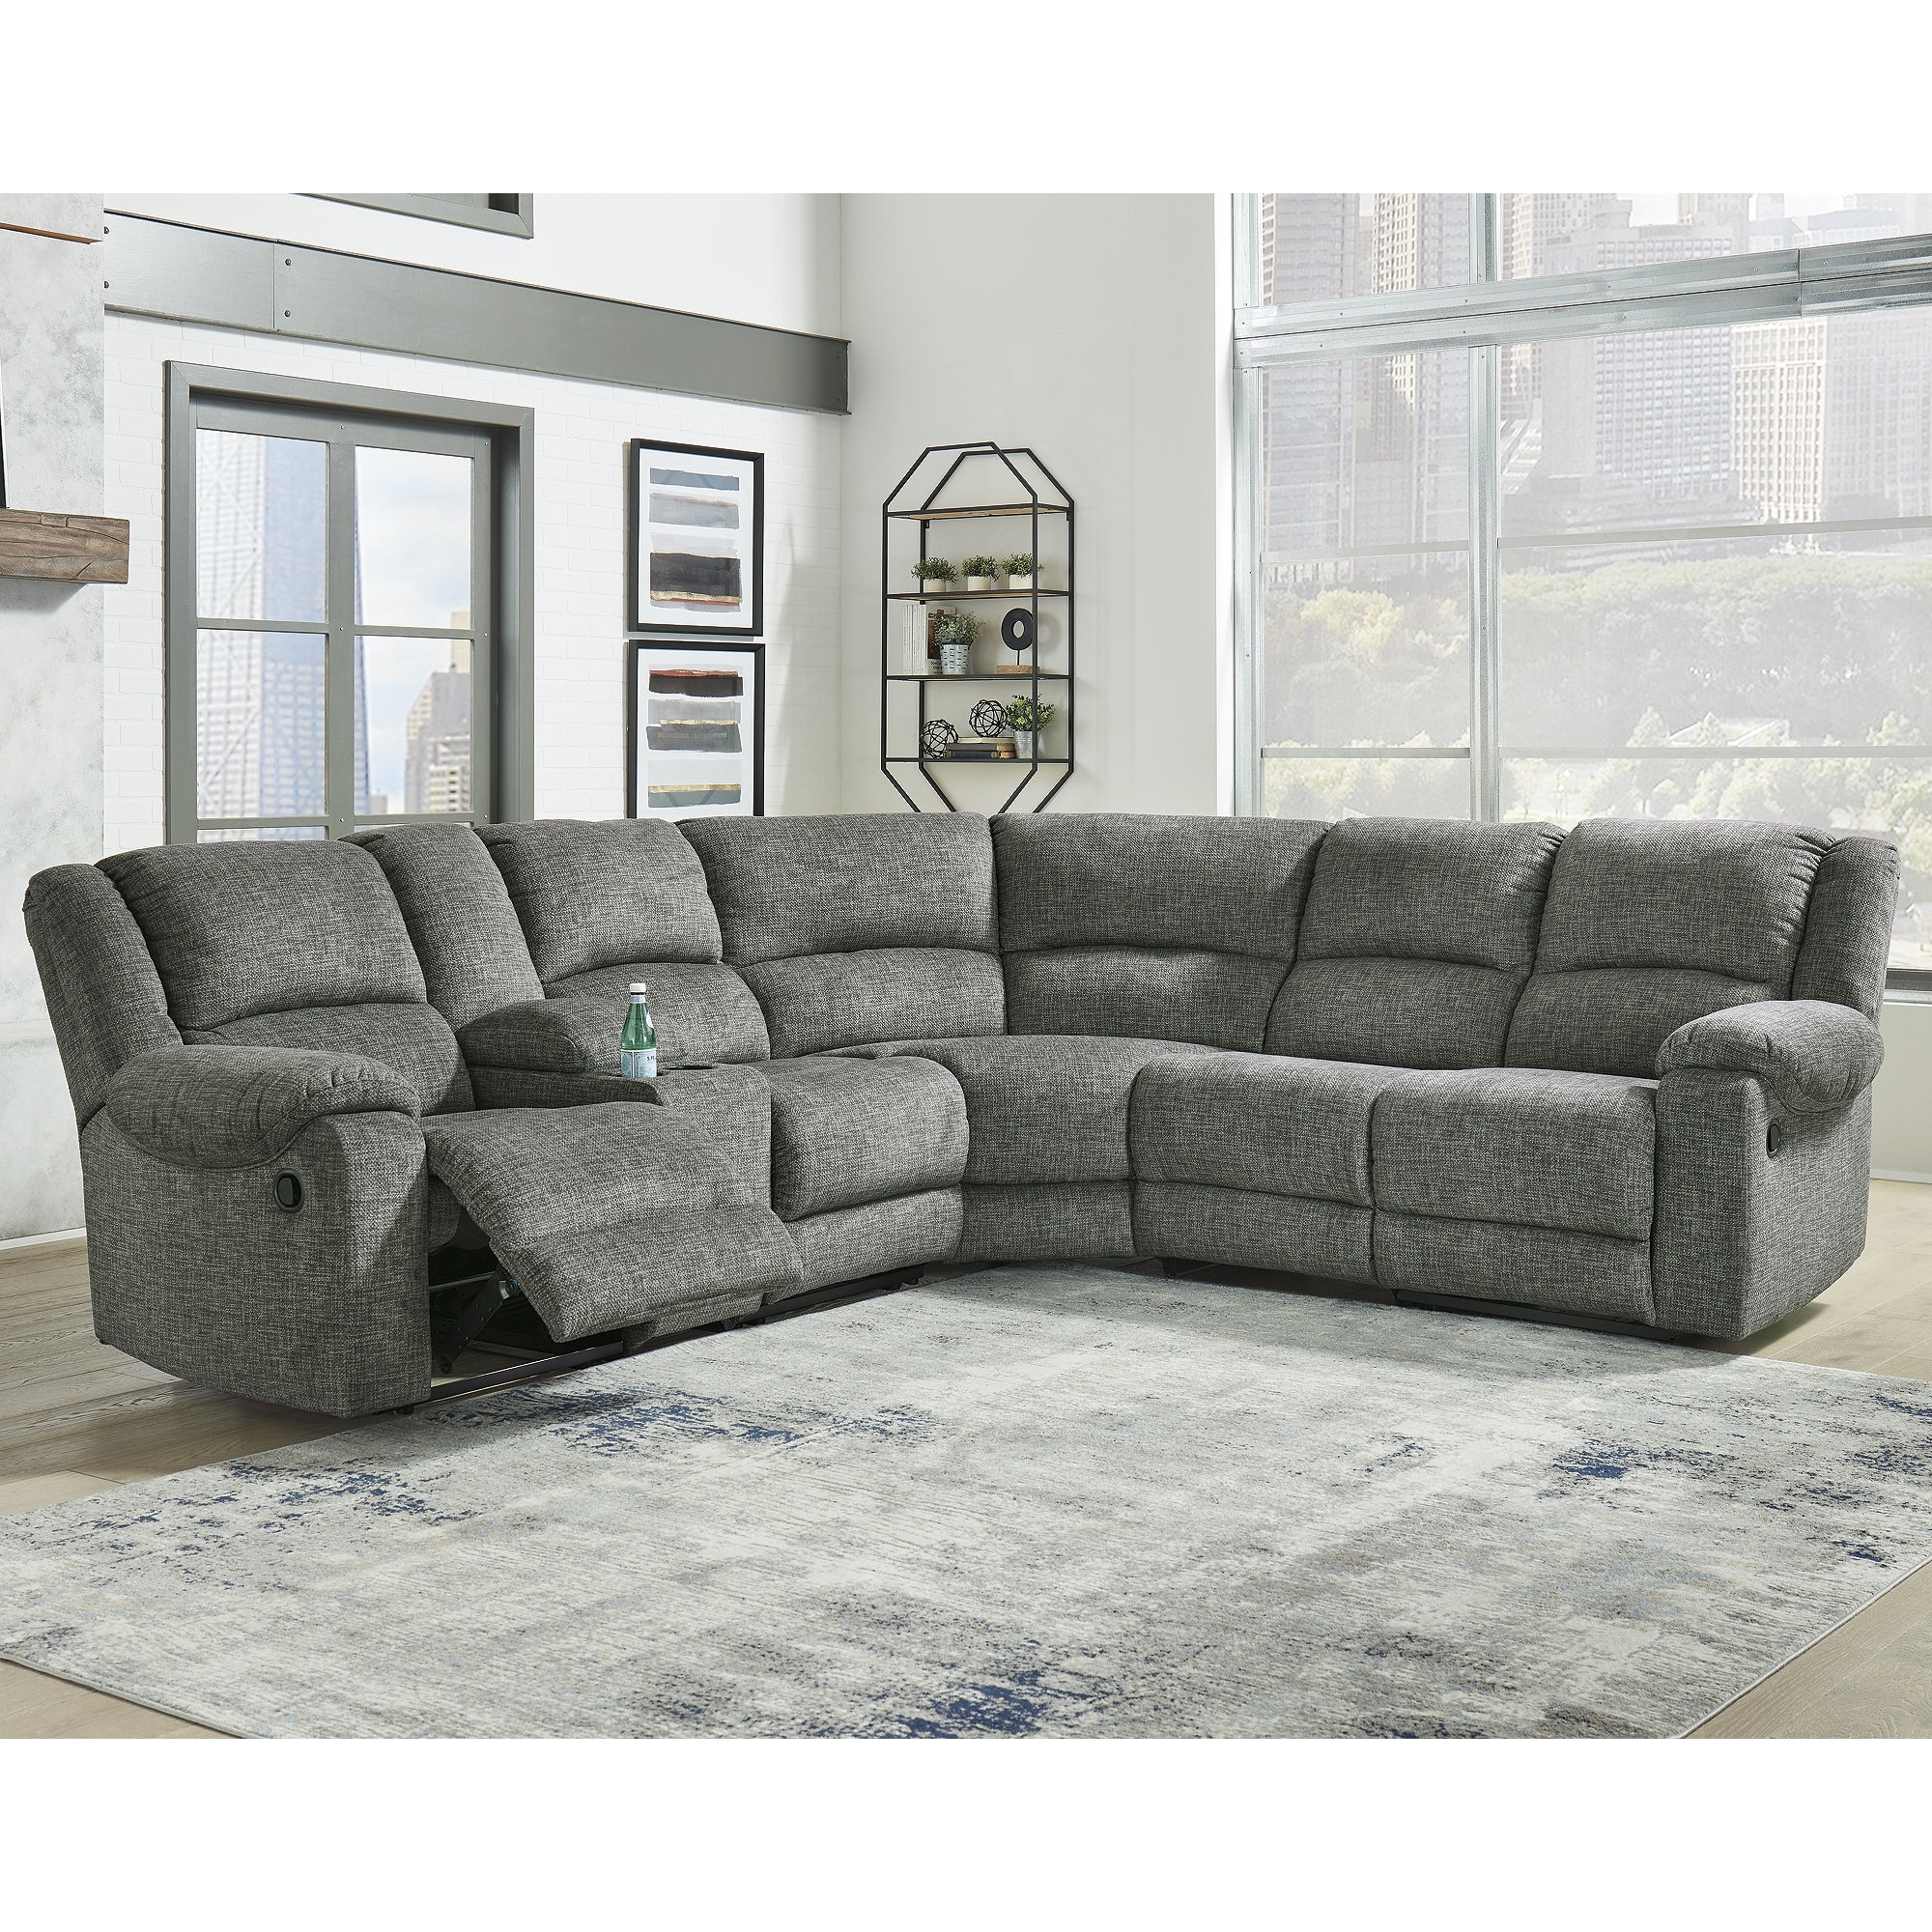 Signature Design By Ashley Goalie Pewter 6-piece Reclining Sectional - Pewter - 141 W X 128 D X 41 H